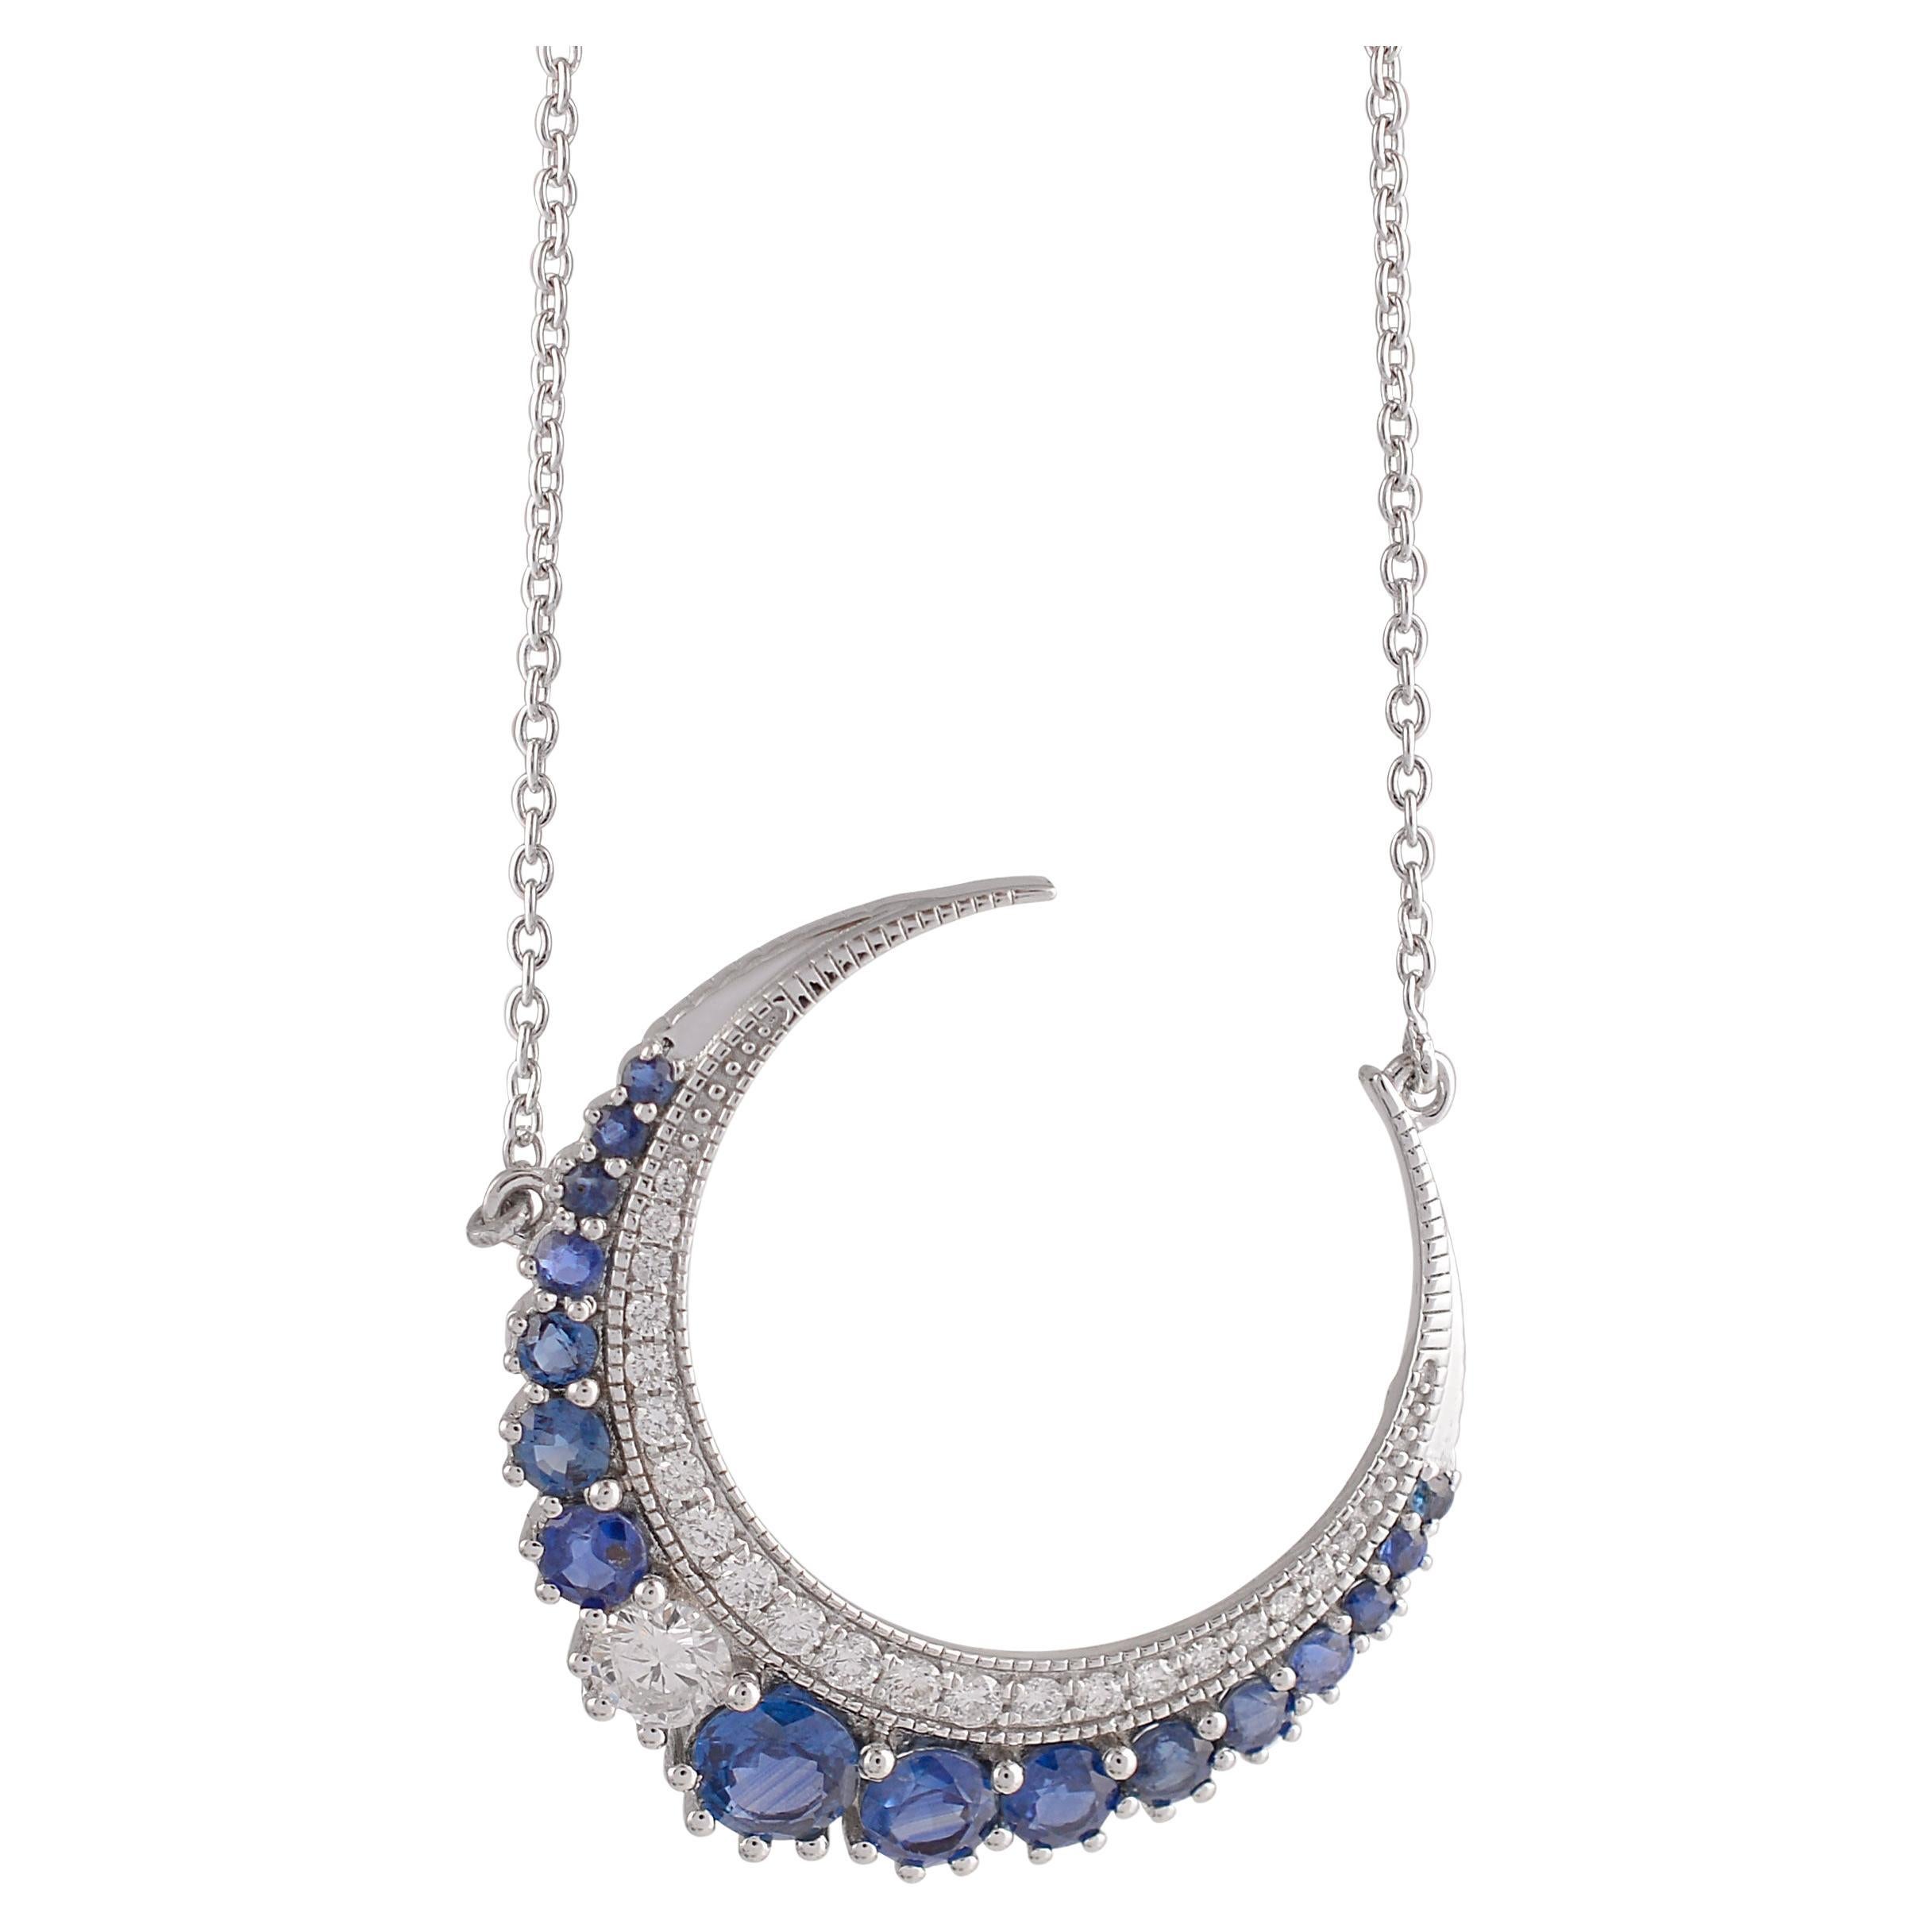 What does a crescent moon necklace mean?